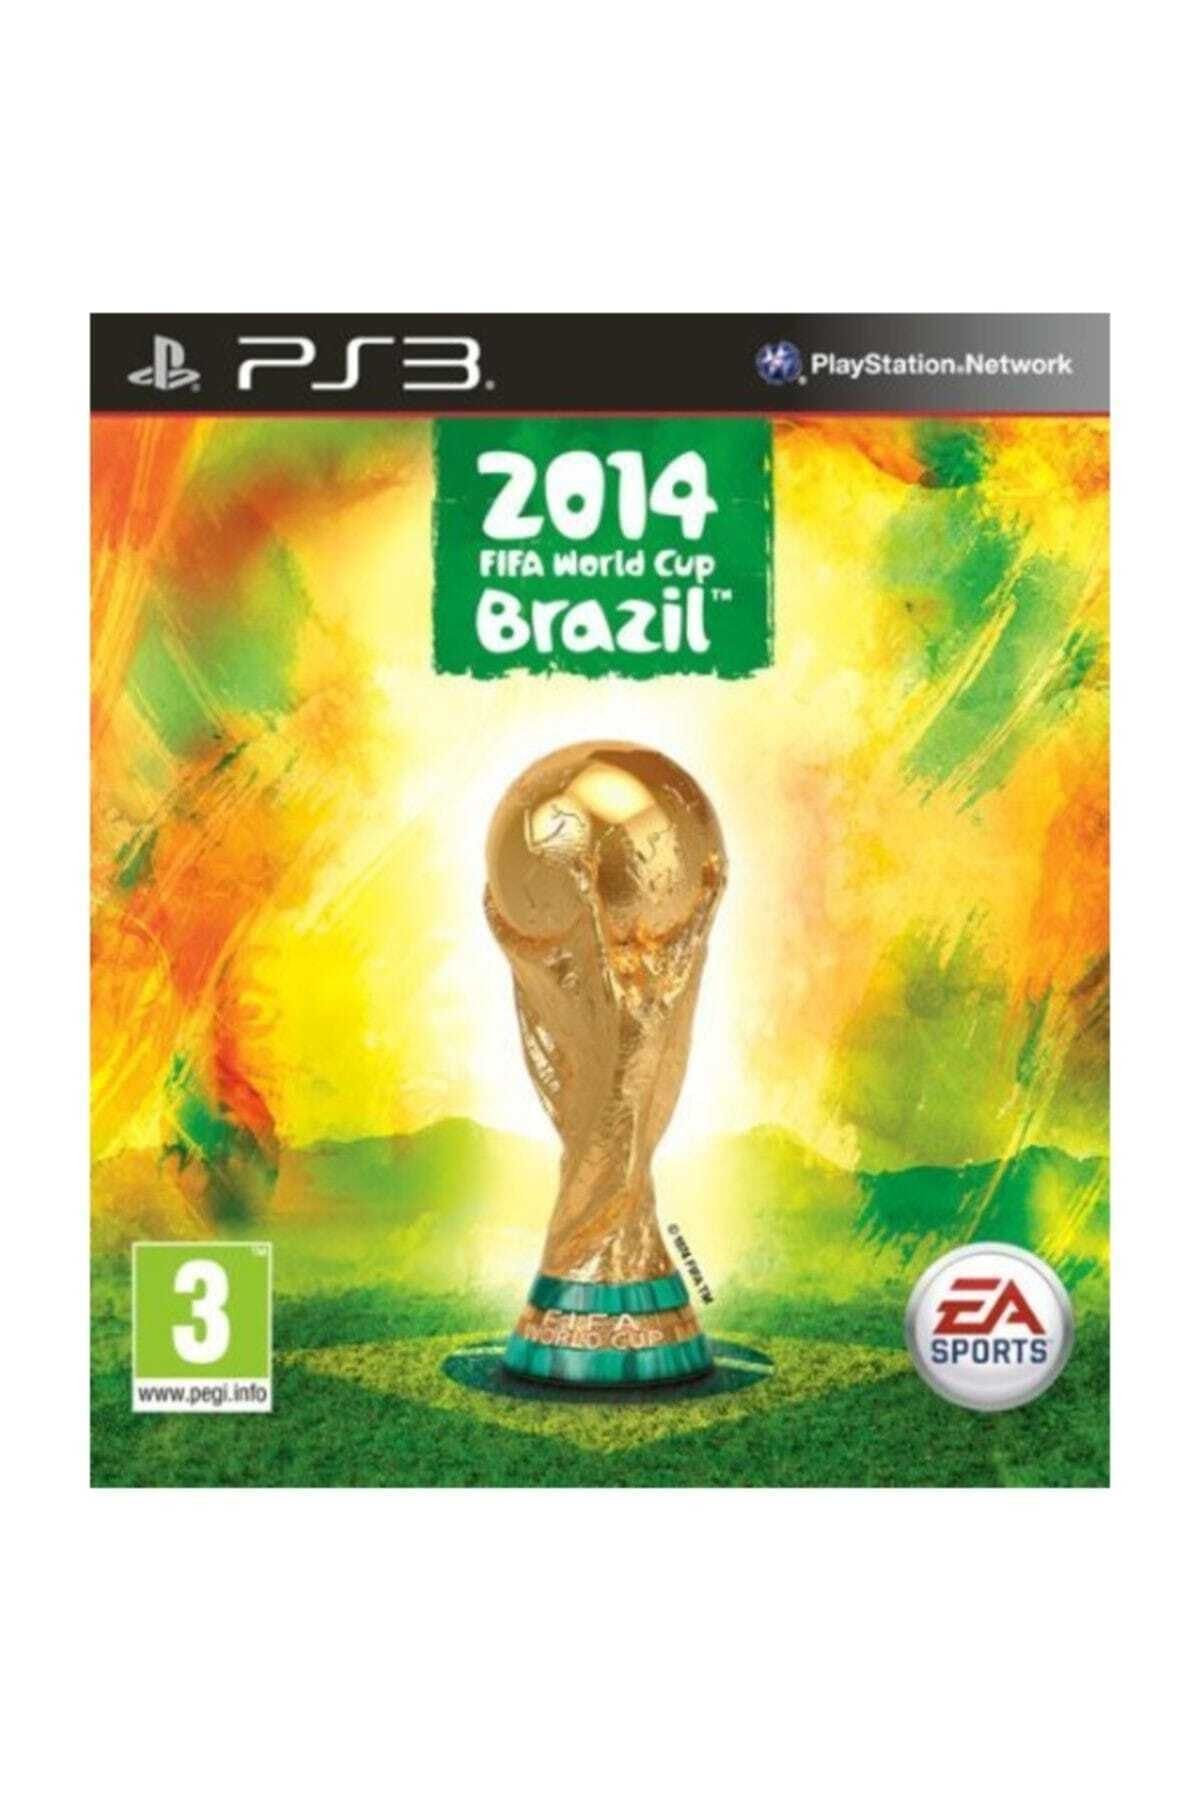 Electronic Arts Ps3 Fifa 2014 World Cup Brazil